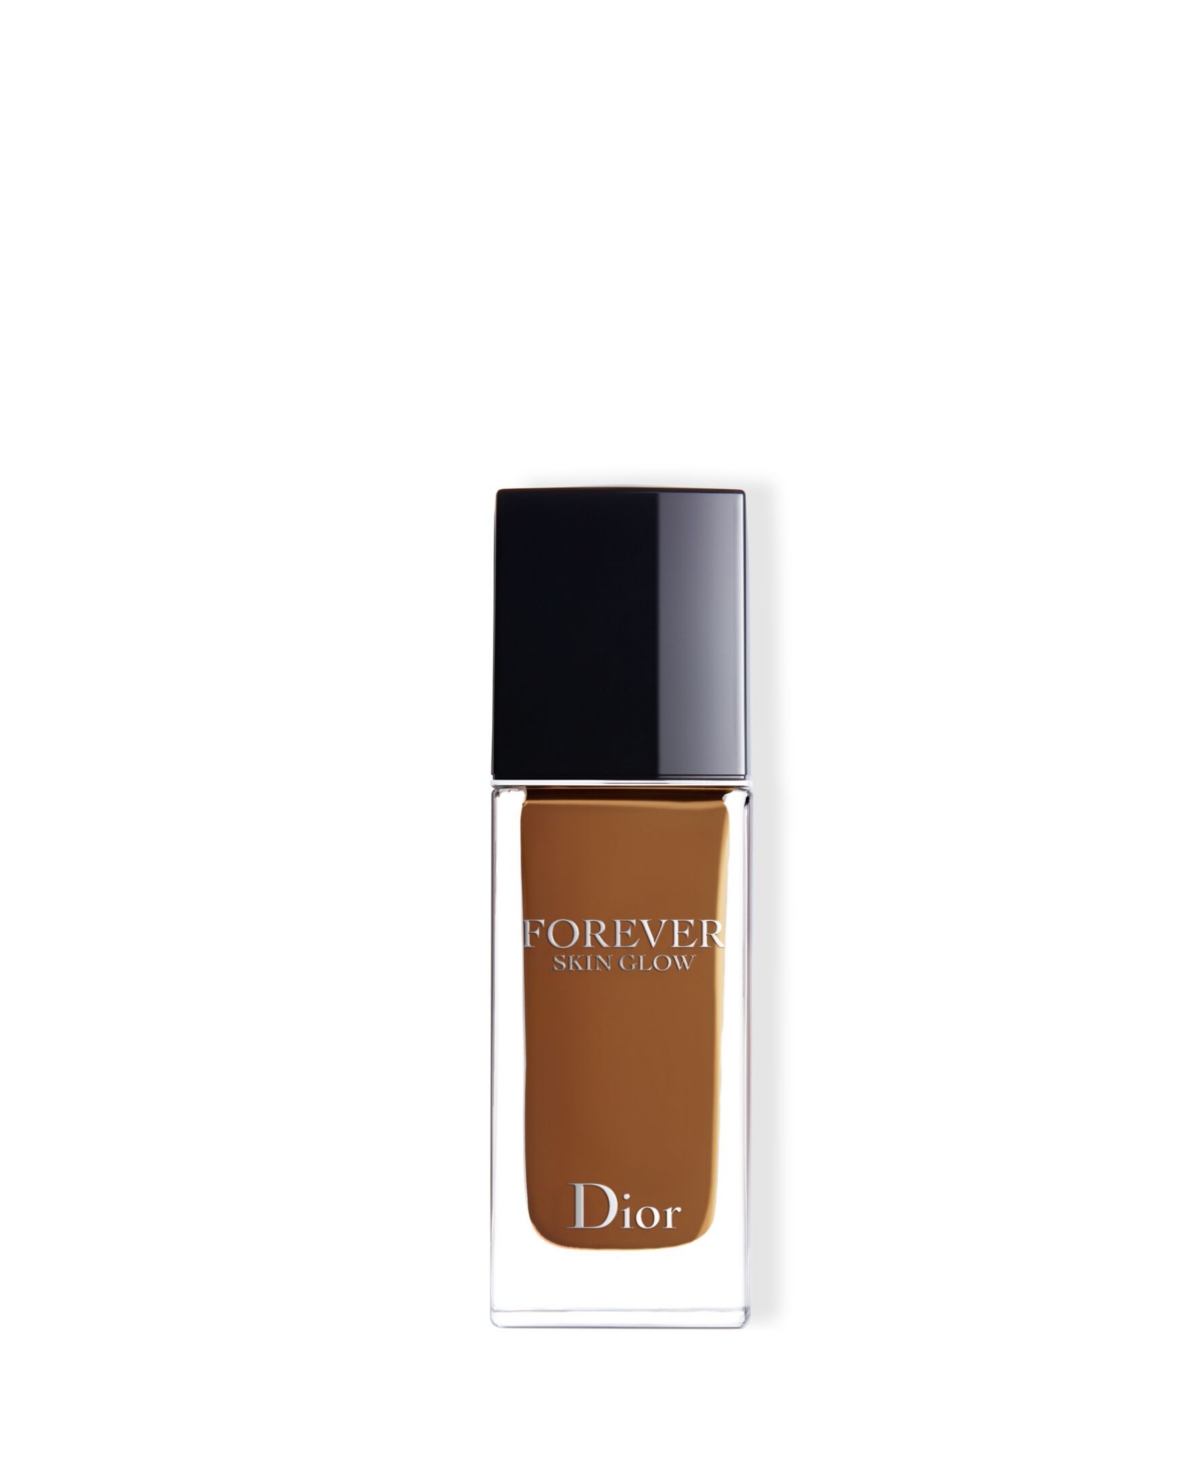 Dior Forever Skin Glow Hydrating Foundation Spf 15 In Warm (deep Skin With Warm Yellow Underto